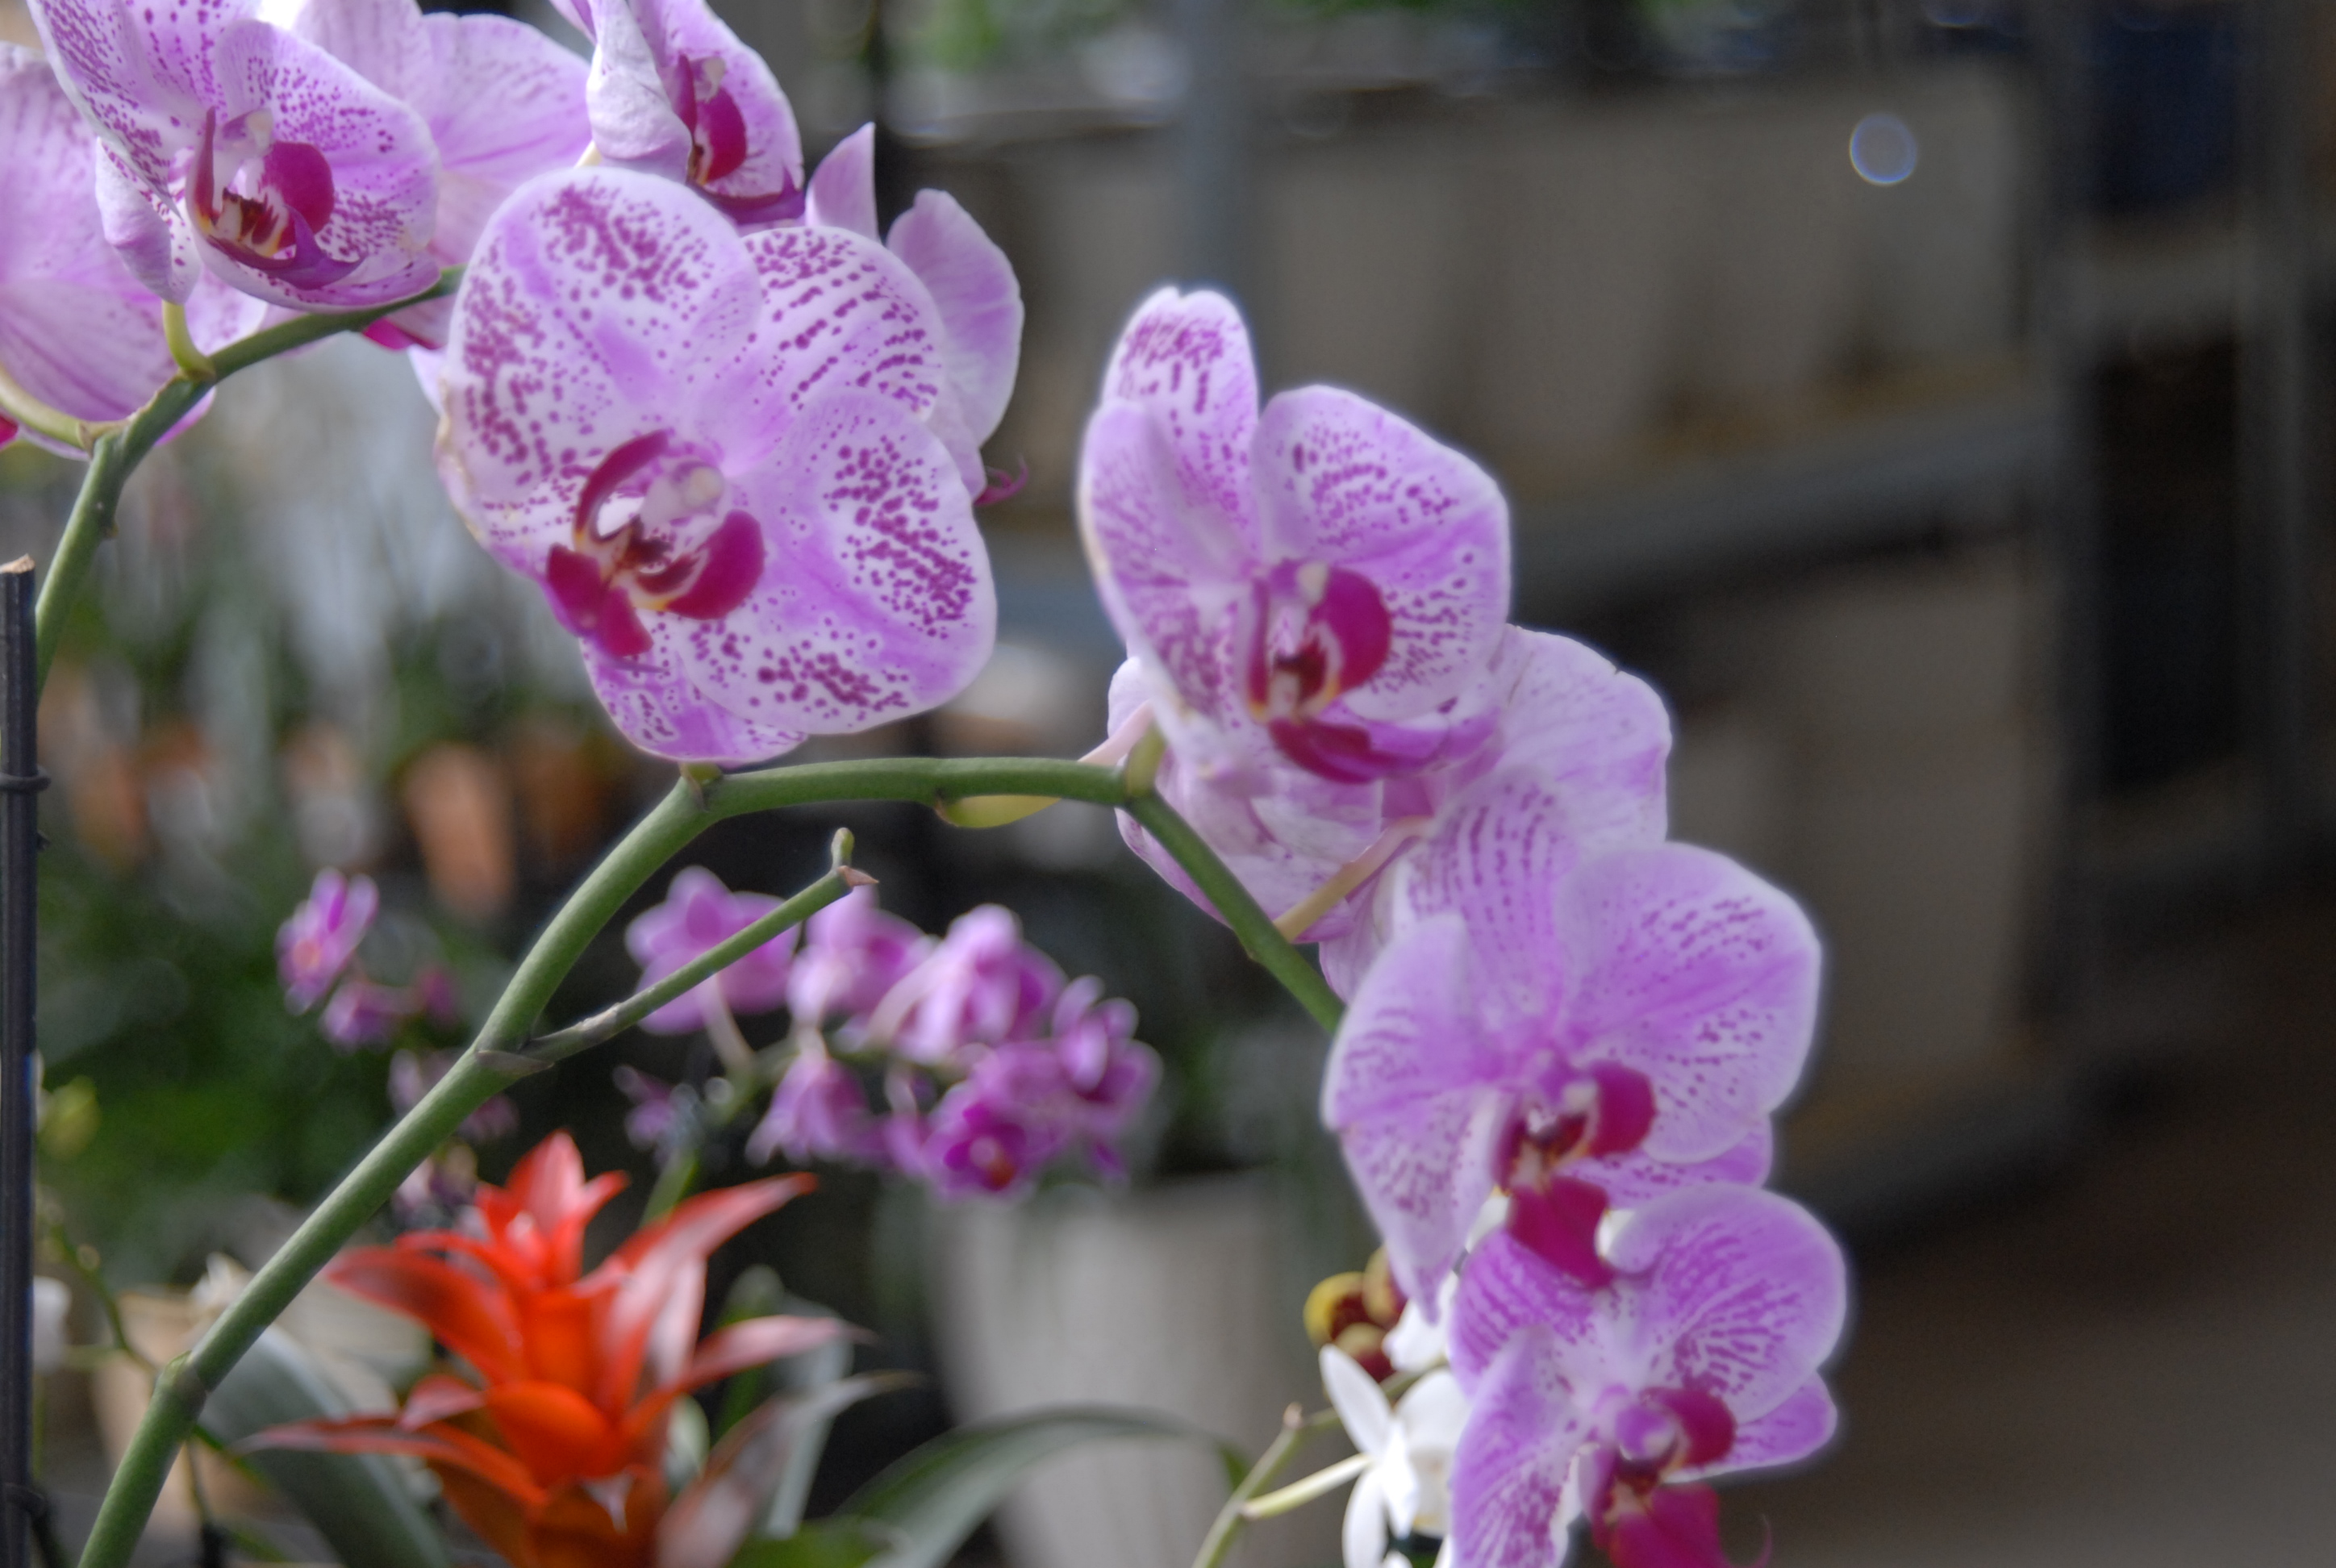 Orchids need proper care